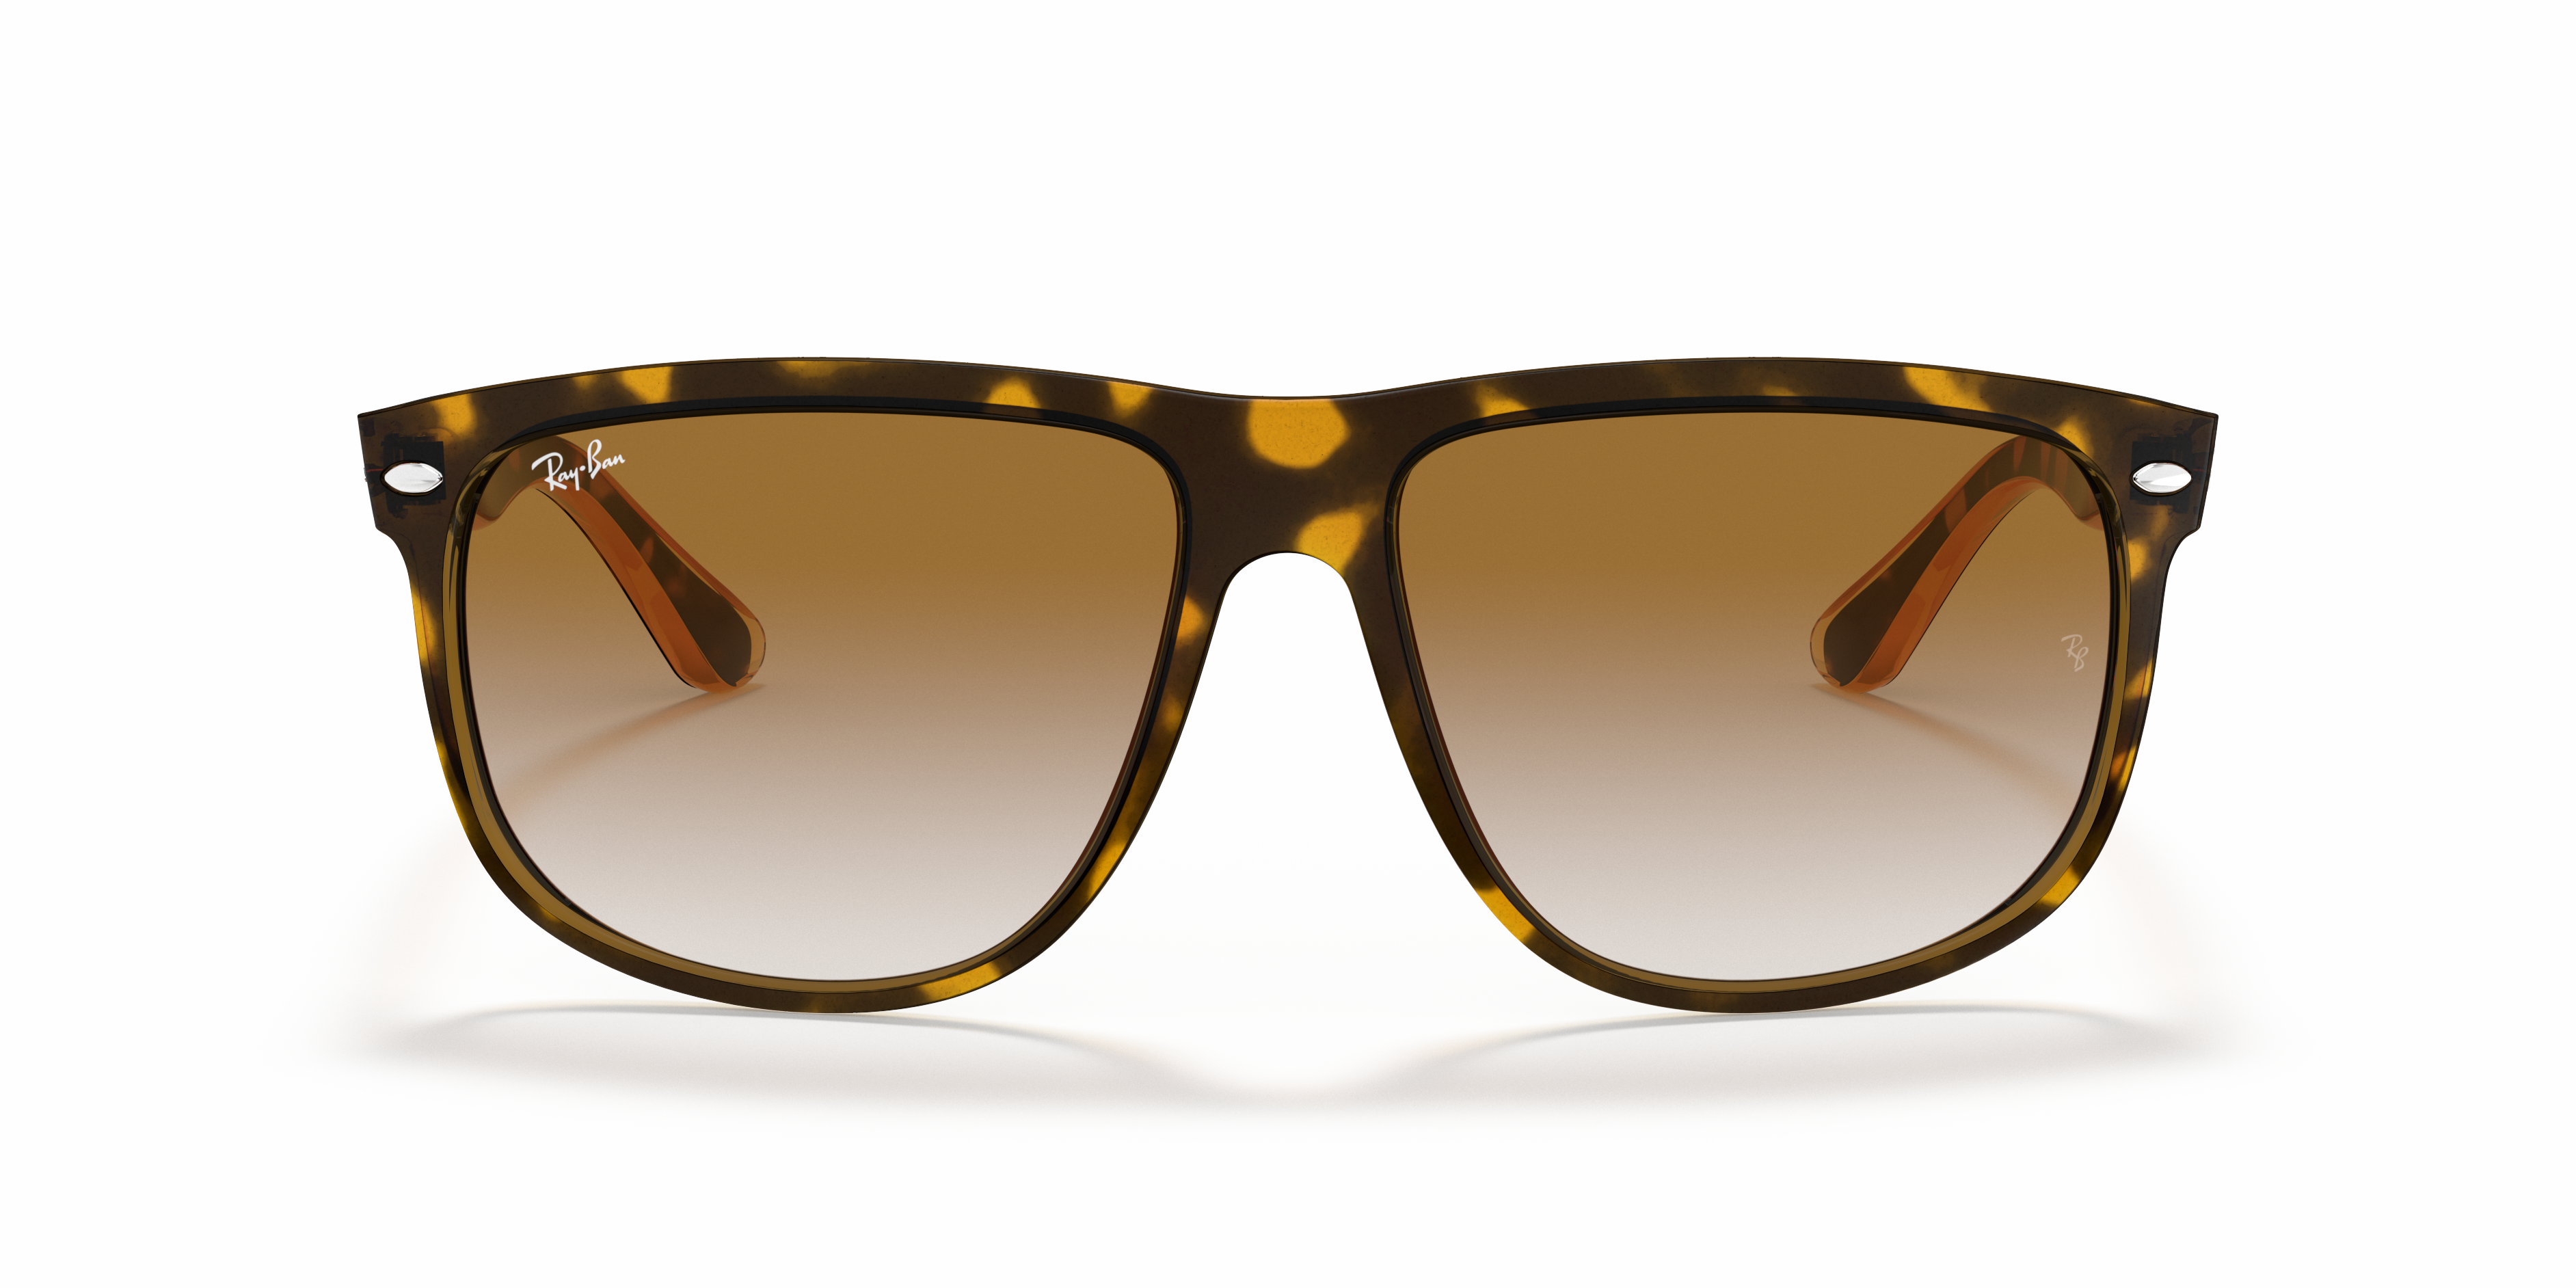 Boyfriend Sunglasses in Tortoise and Light Brown | Ray-Ban®